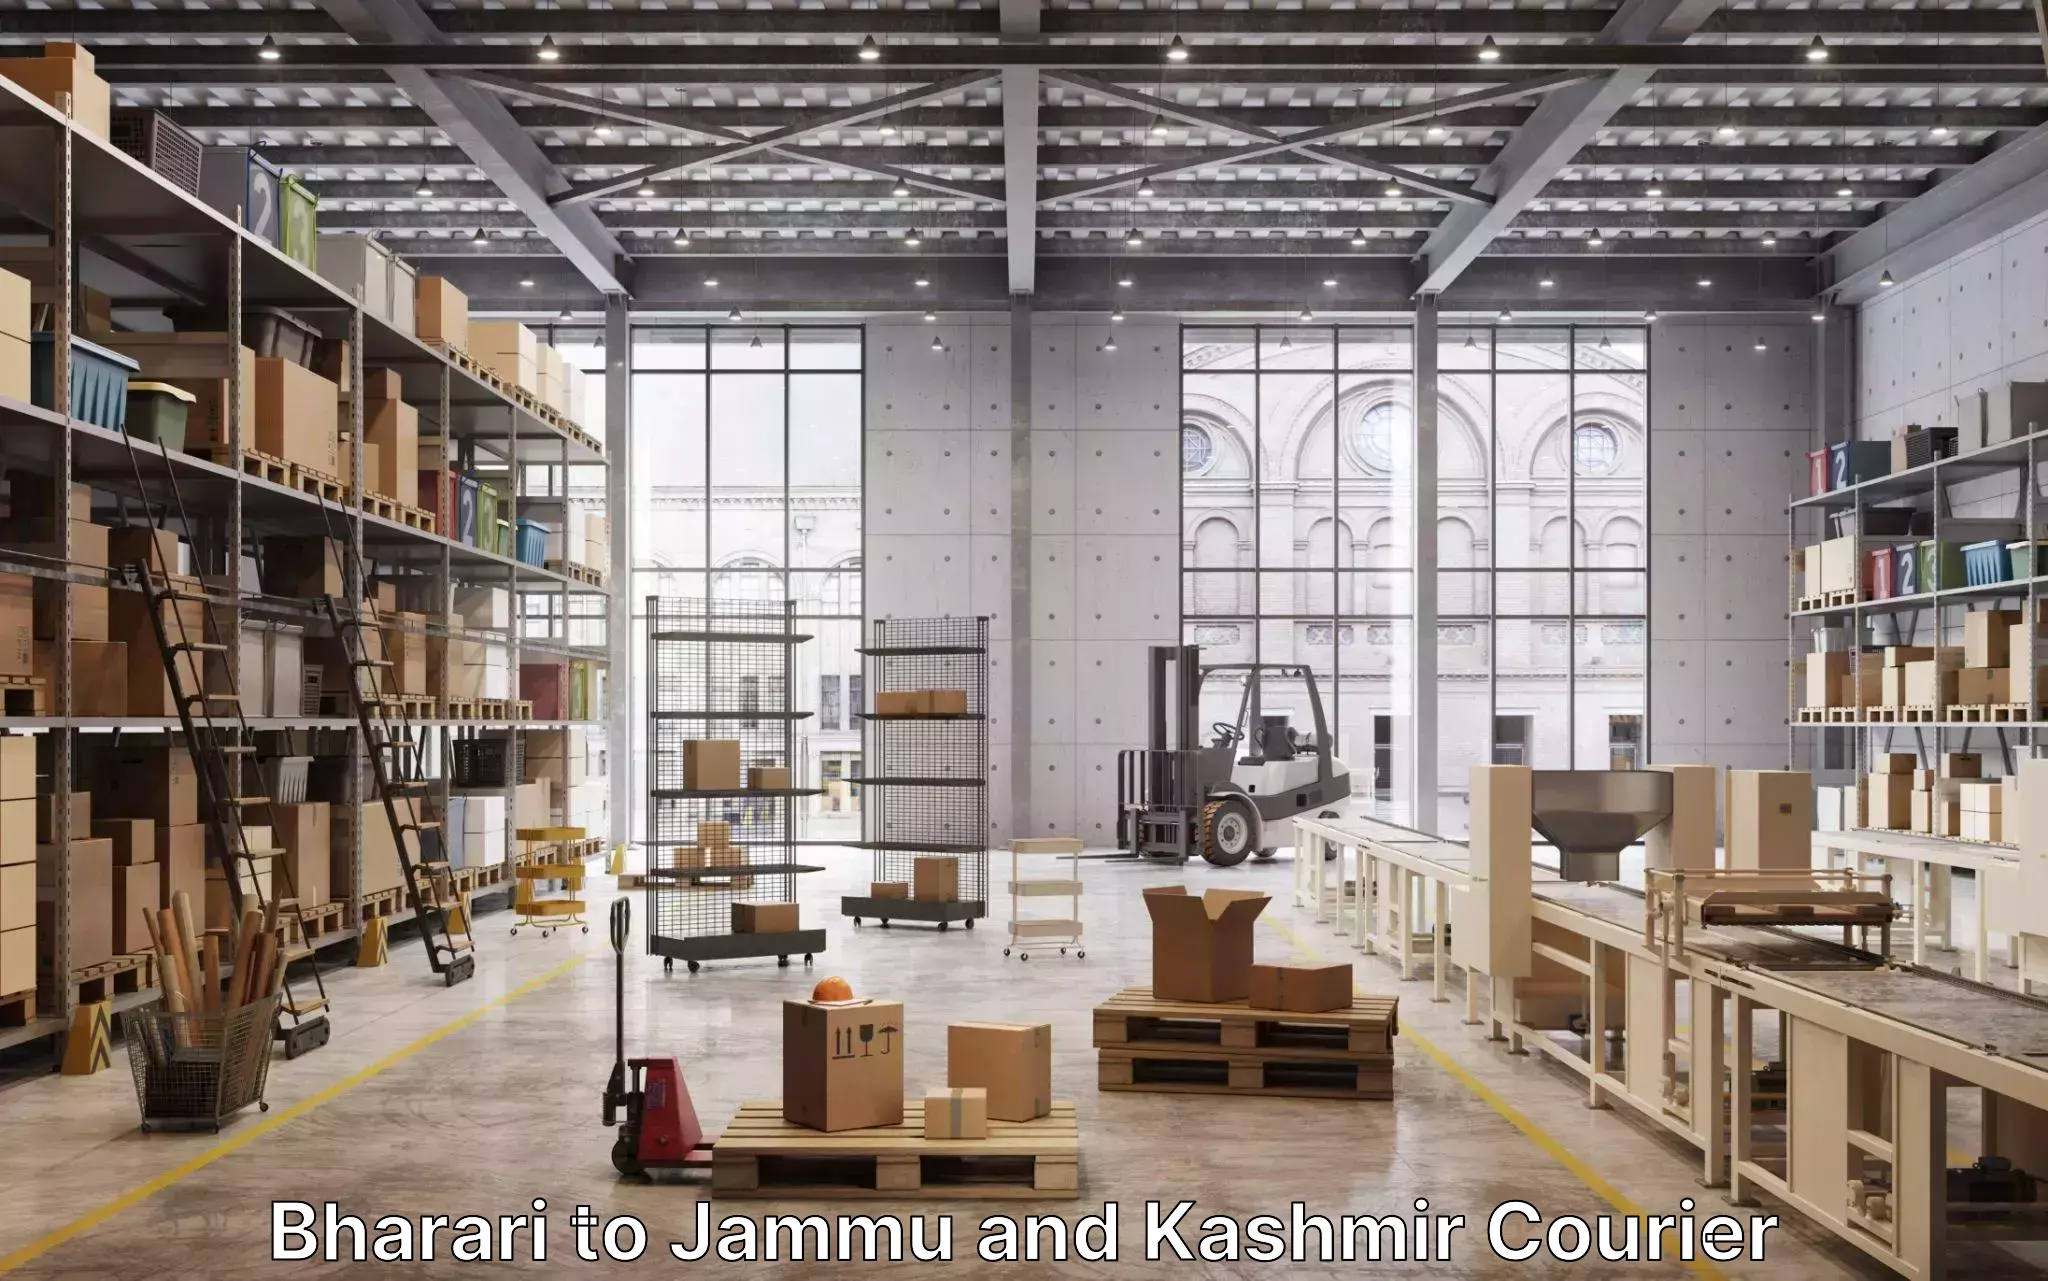 Furniture delivery service Bharari to Jammu and Kashmir